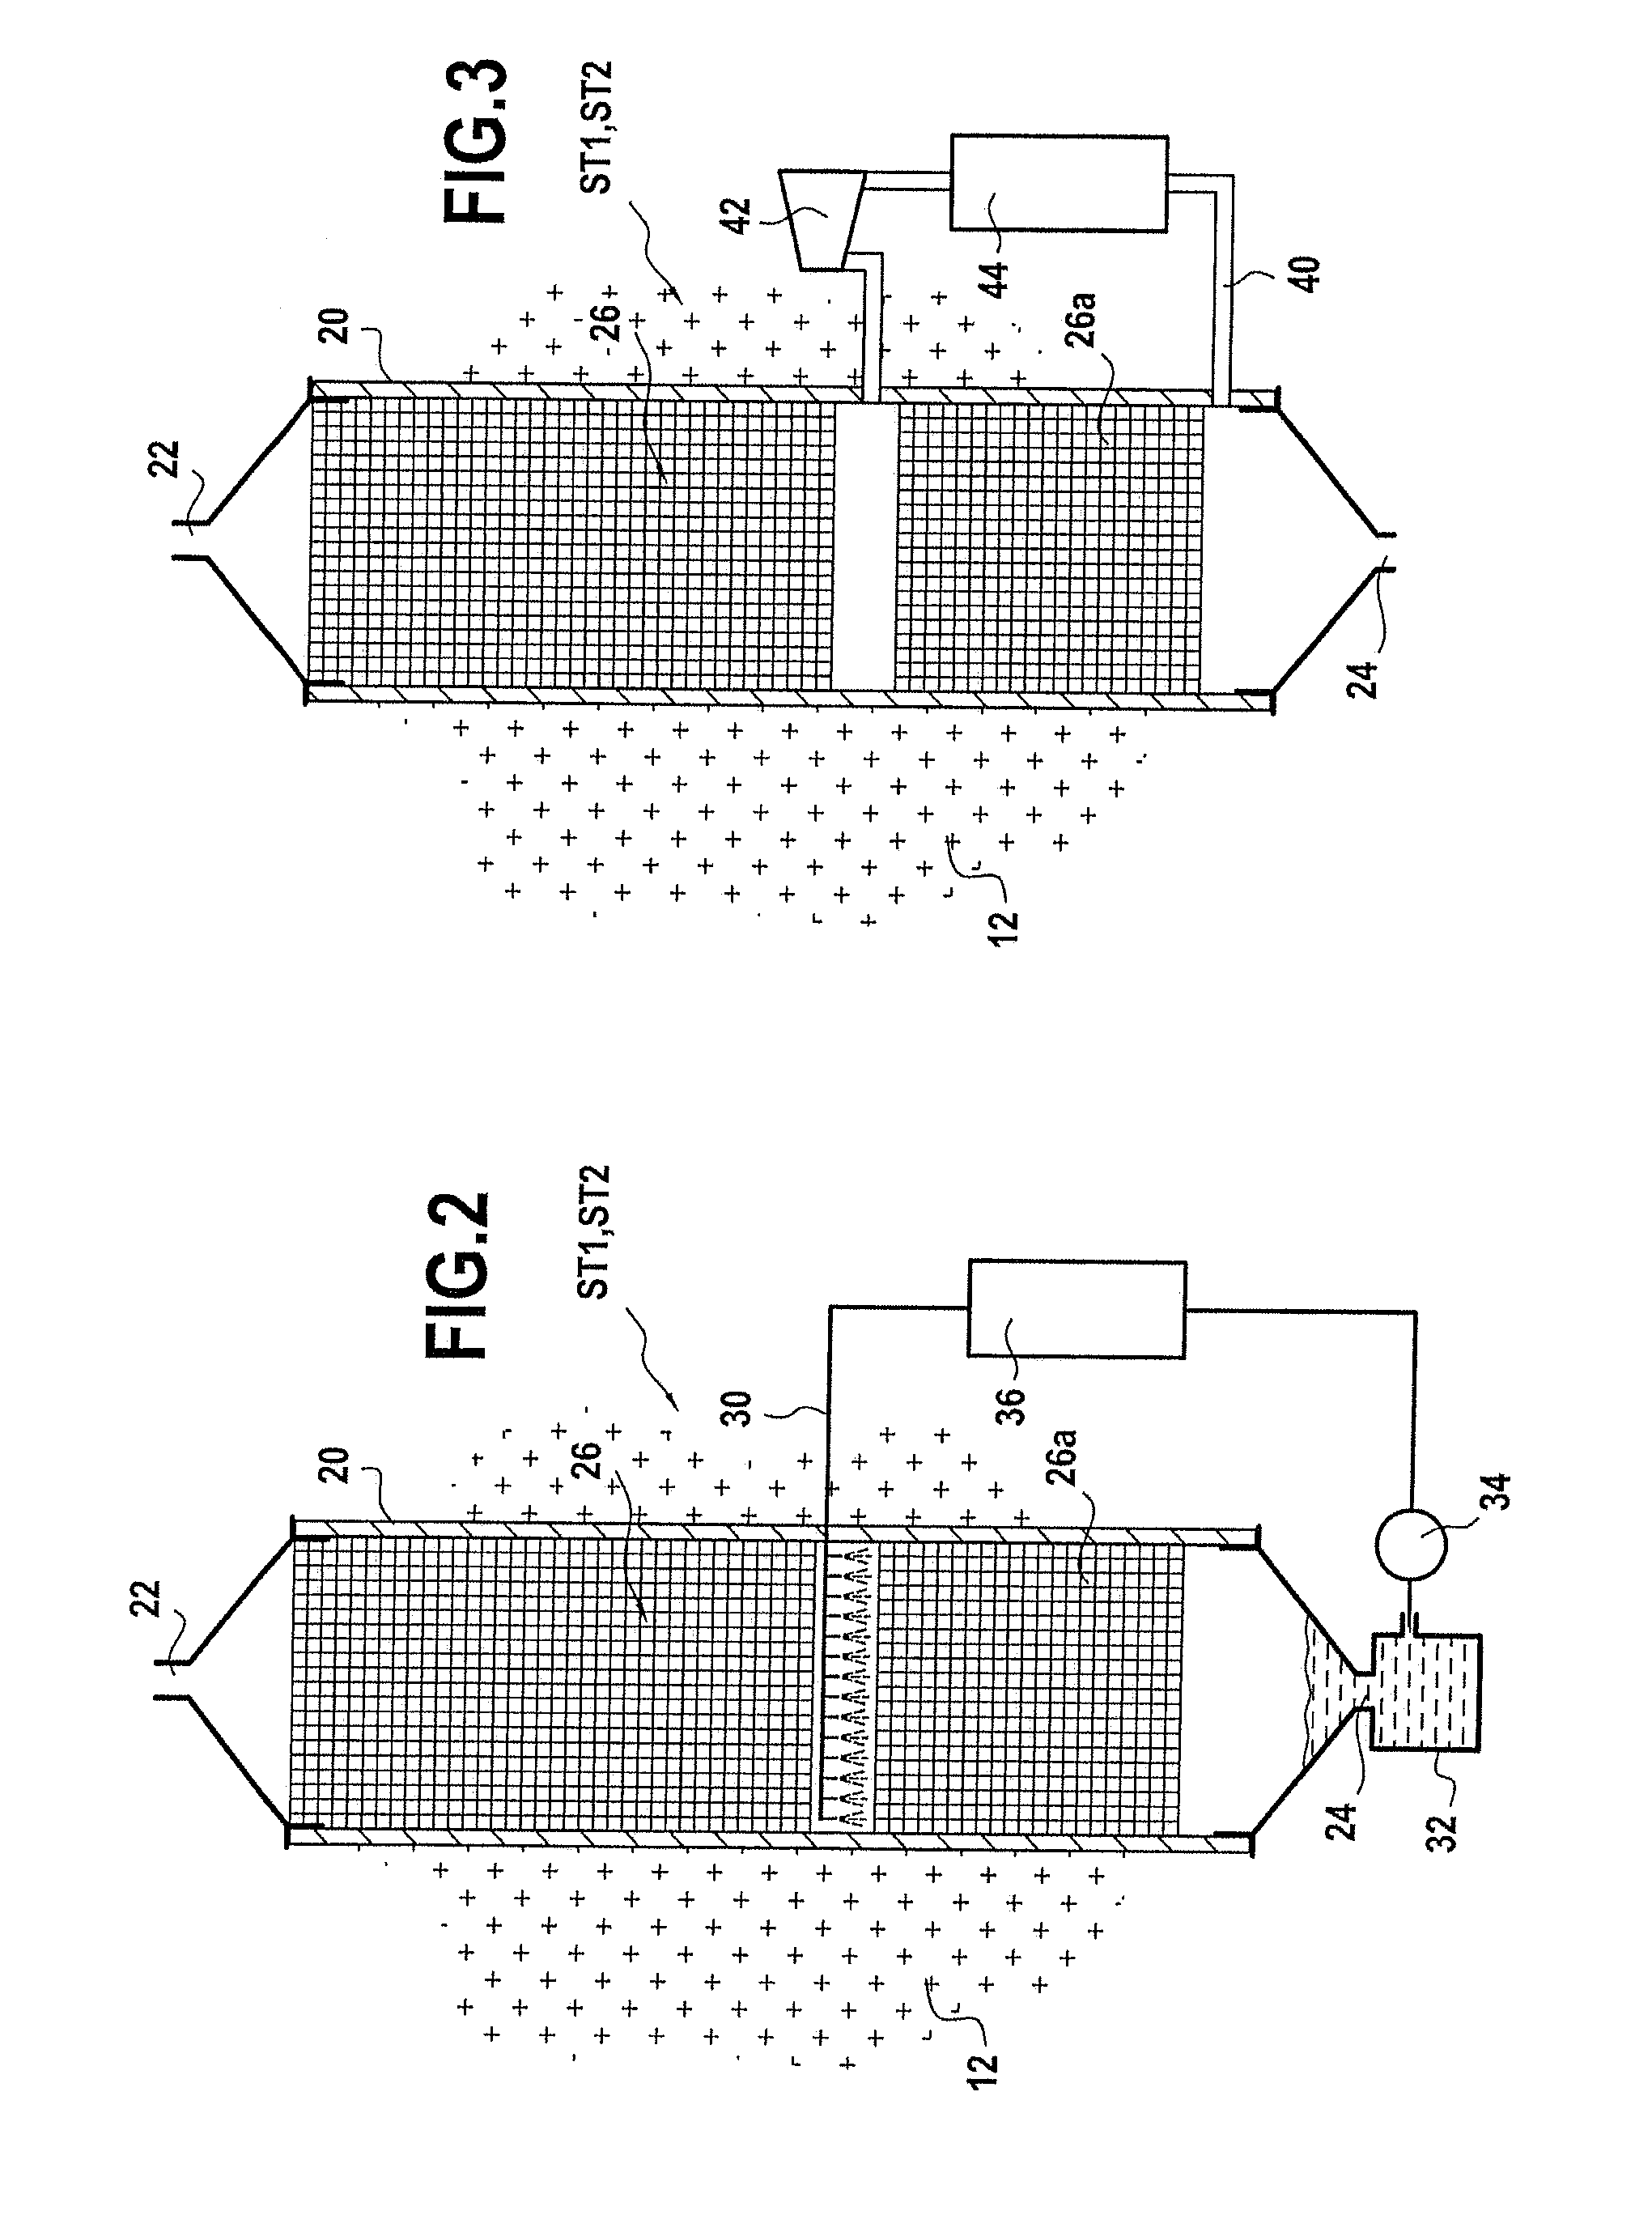 Regulating the Temperature of a Heat Regenerator Used in an Installation for Storing Energy by Adiabatic Compression of Air